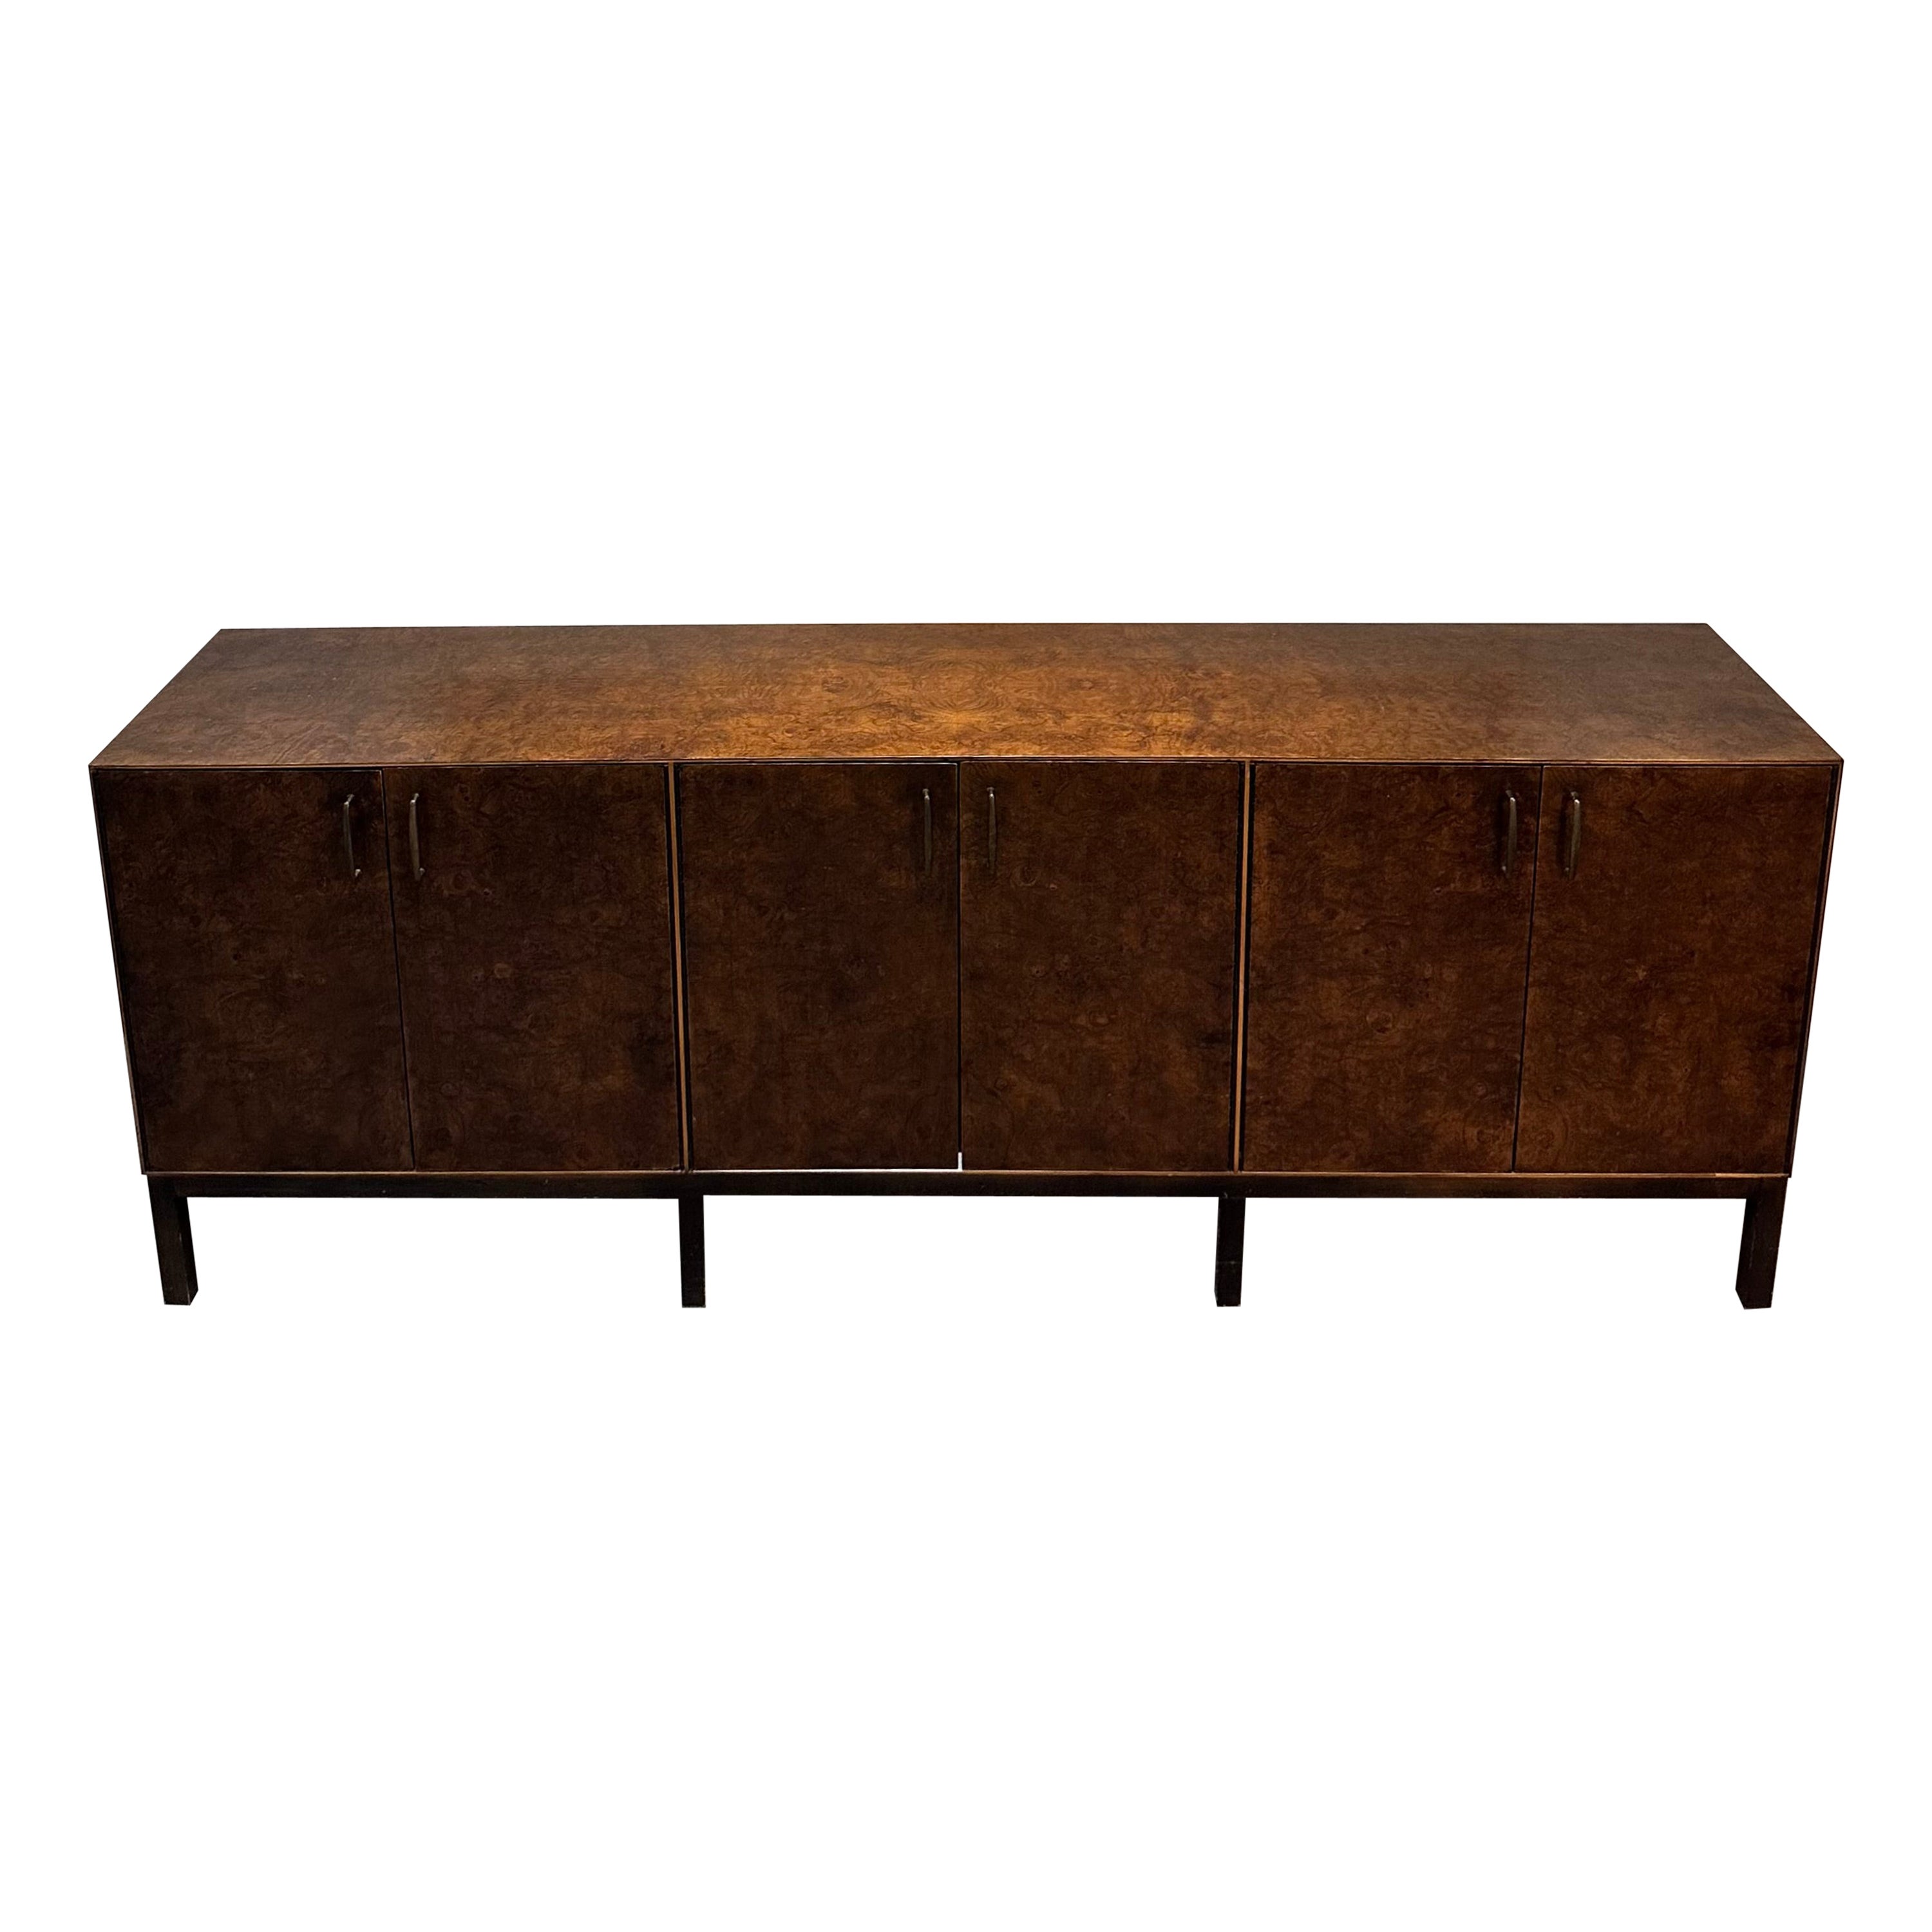 Milo Baughman for Directional Burled Walnut Sideboard or Credenza For Sale